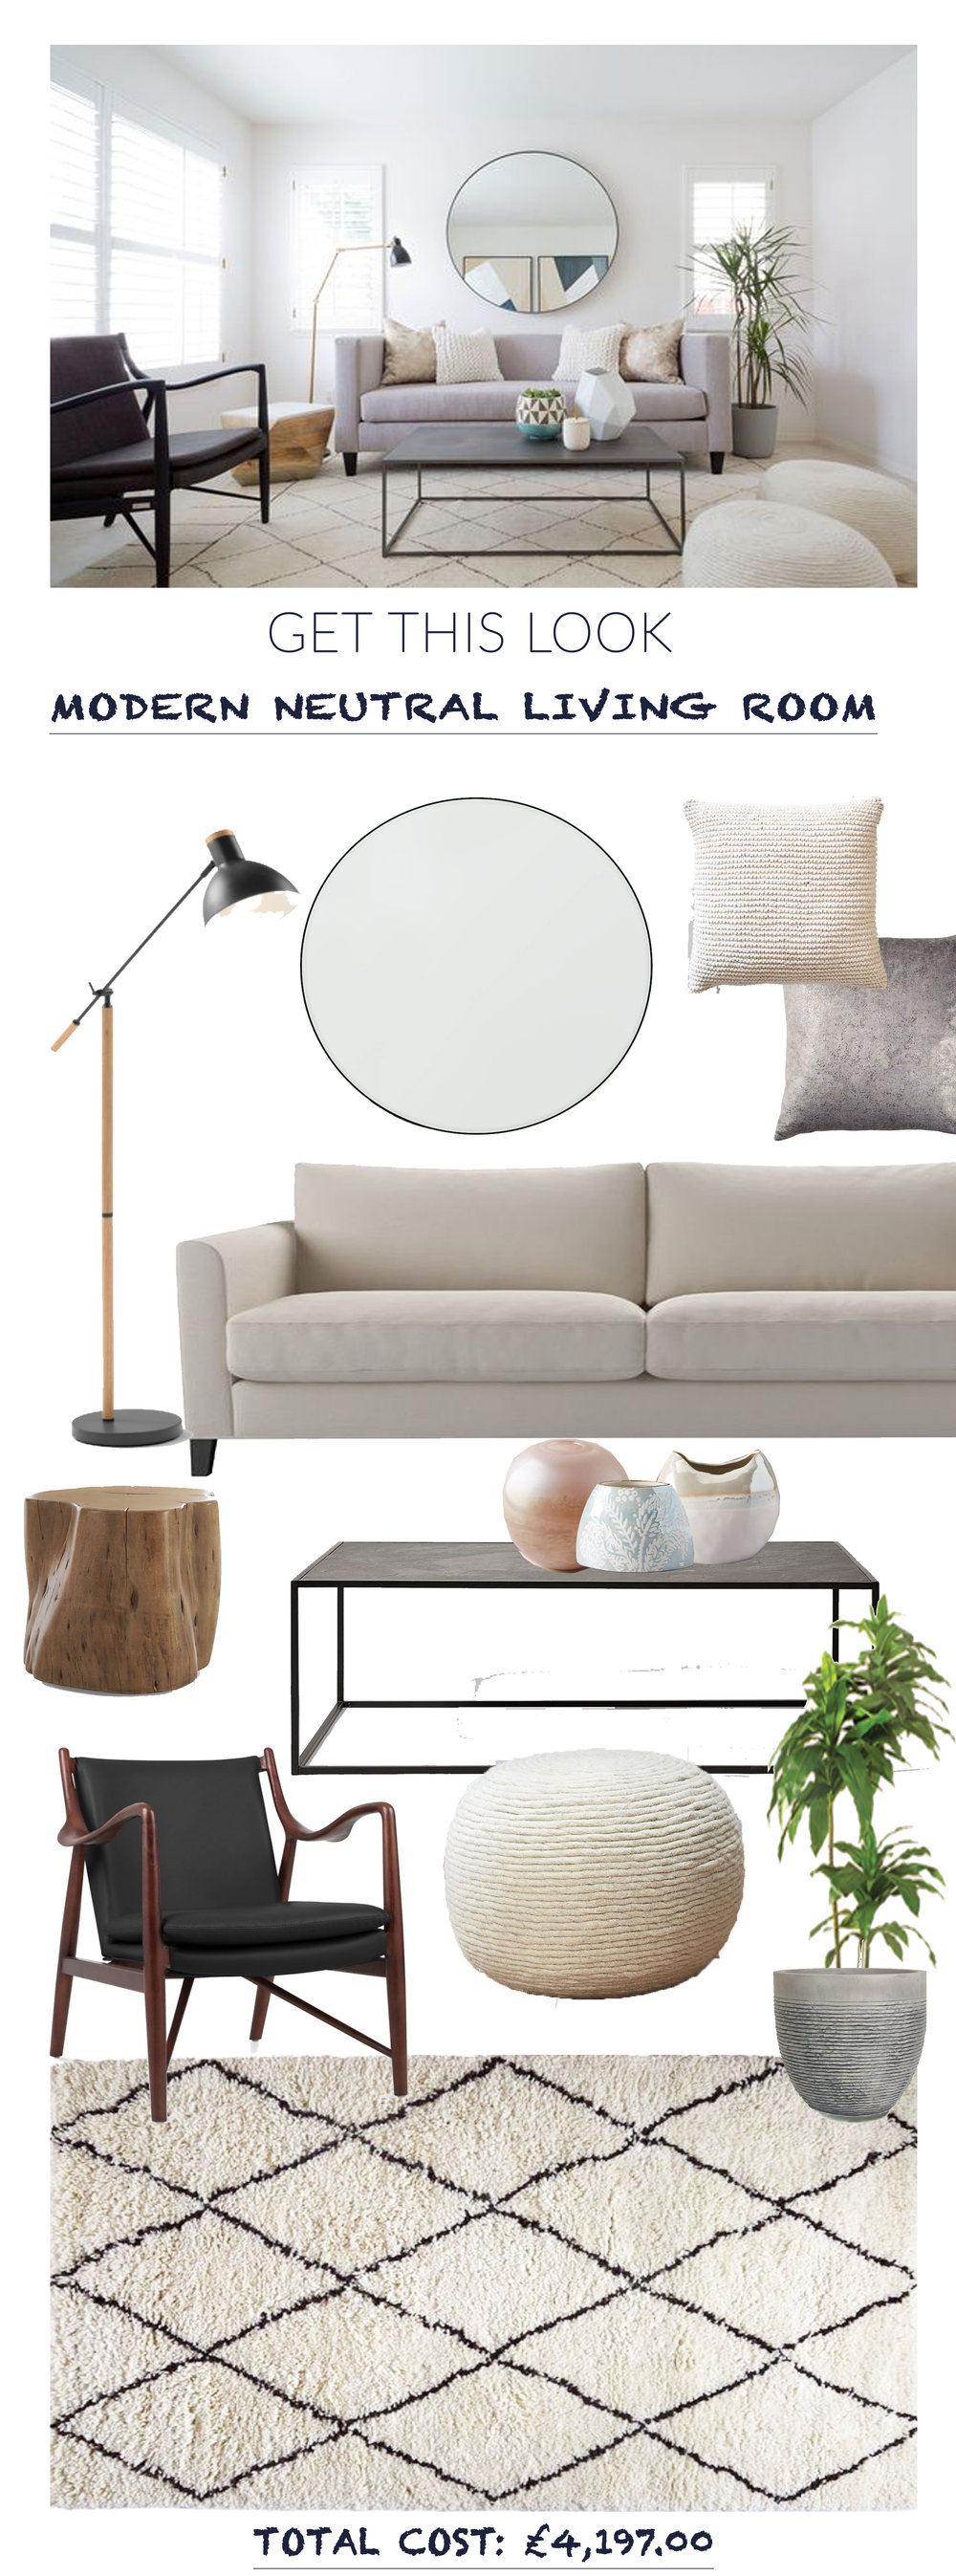 get this look modern and neutral living room house the crate barrel teton accent table sourcing tam eyre shabby chic shelves pottery barn counter height metal with glass top blue